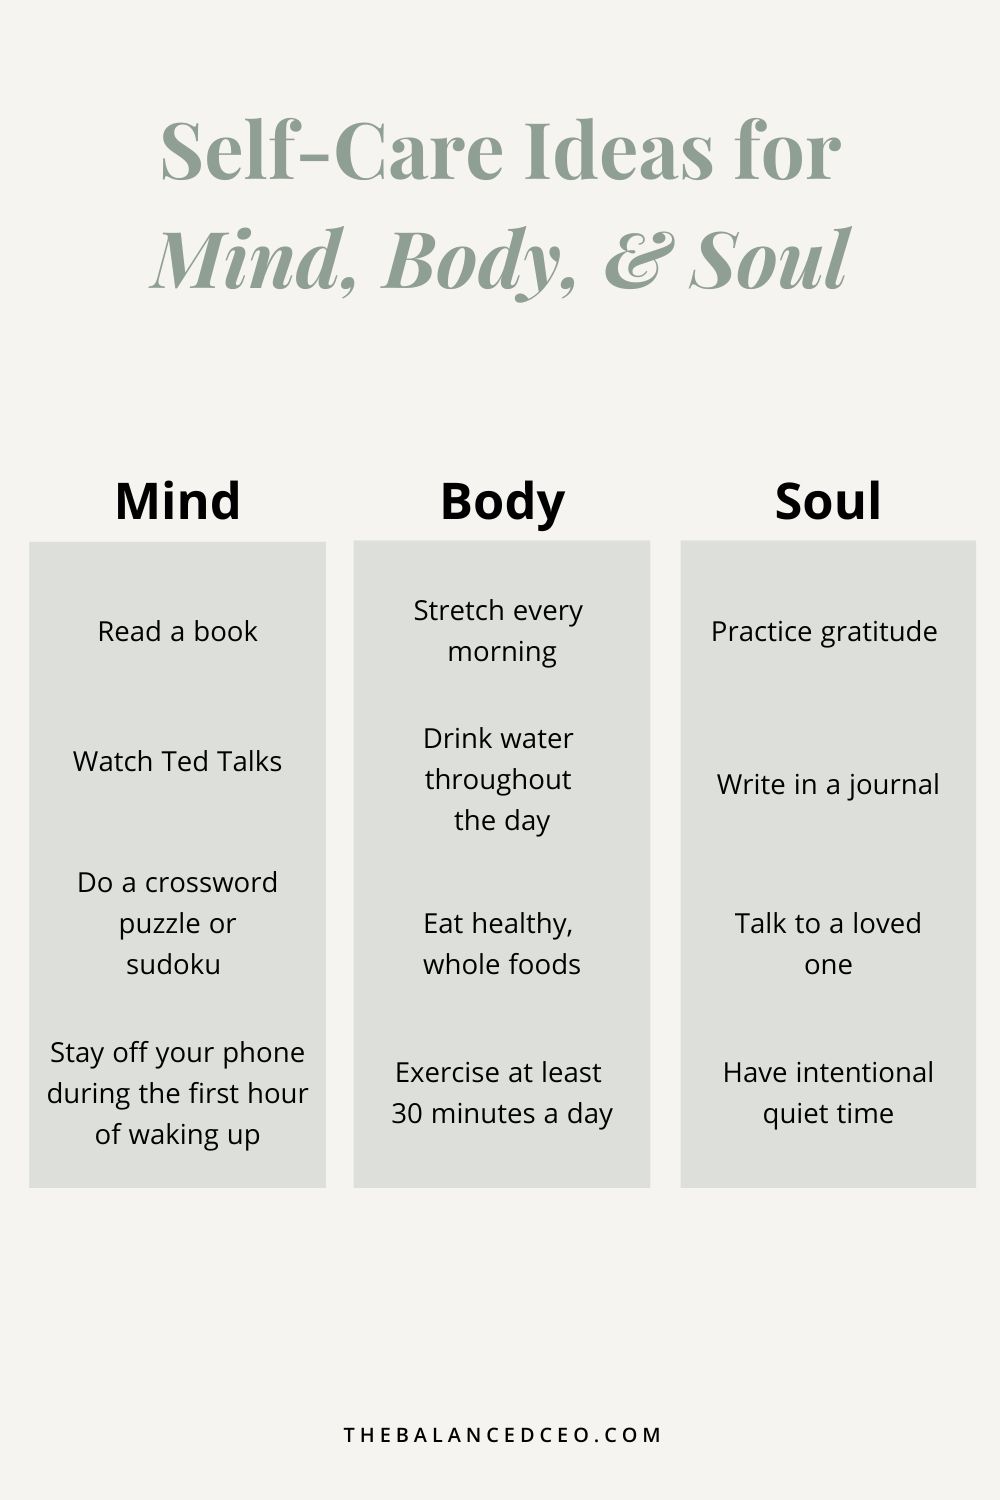 Self-Care Ideas for Mind, Body, and Soul